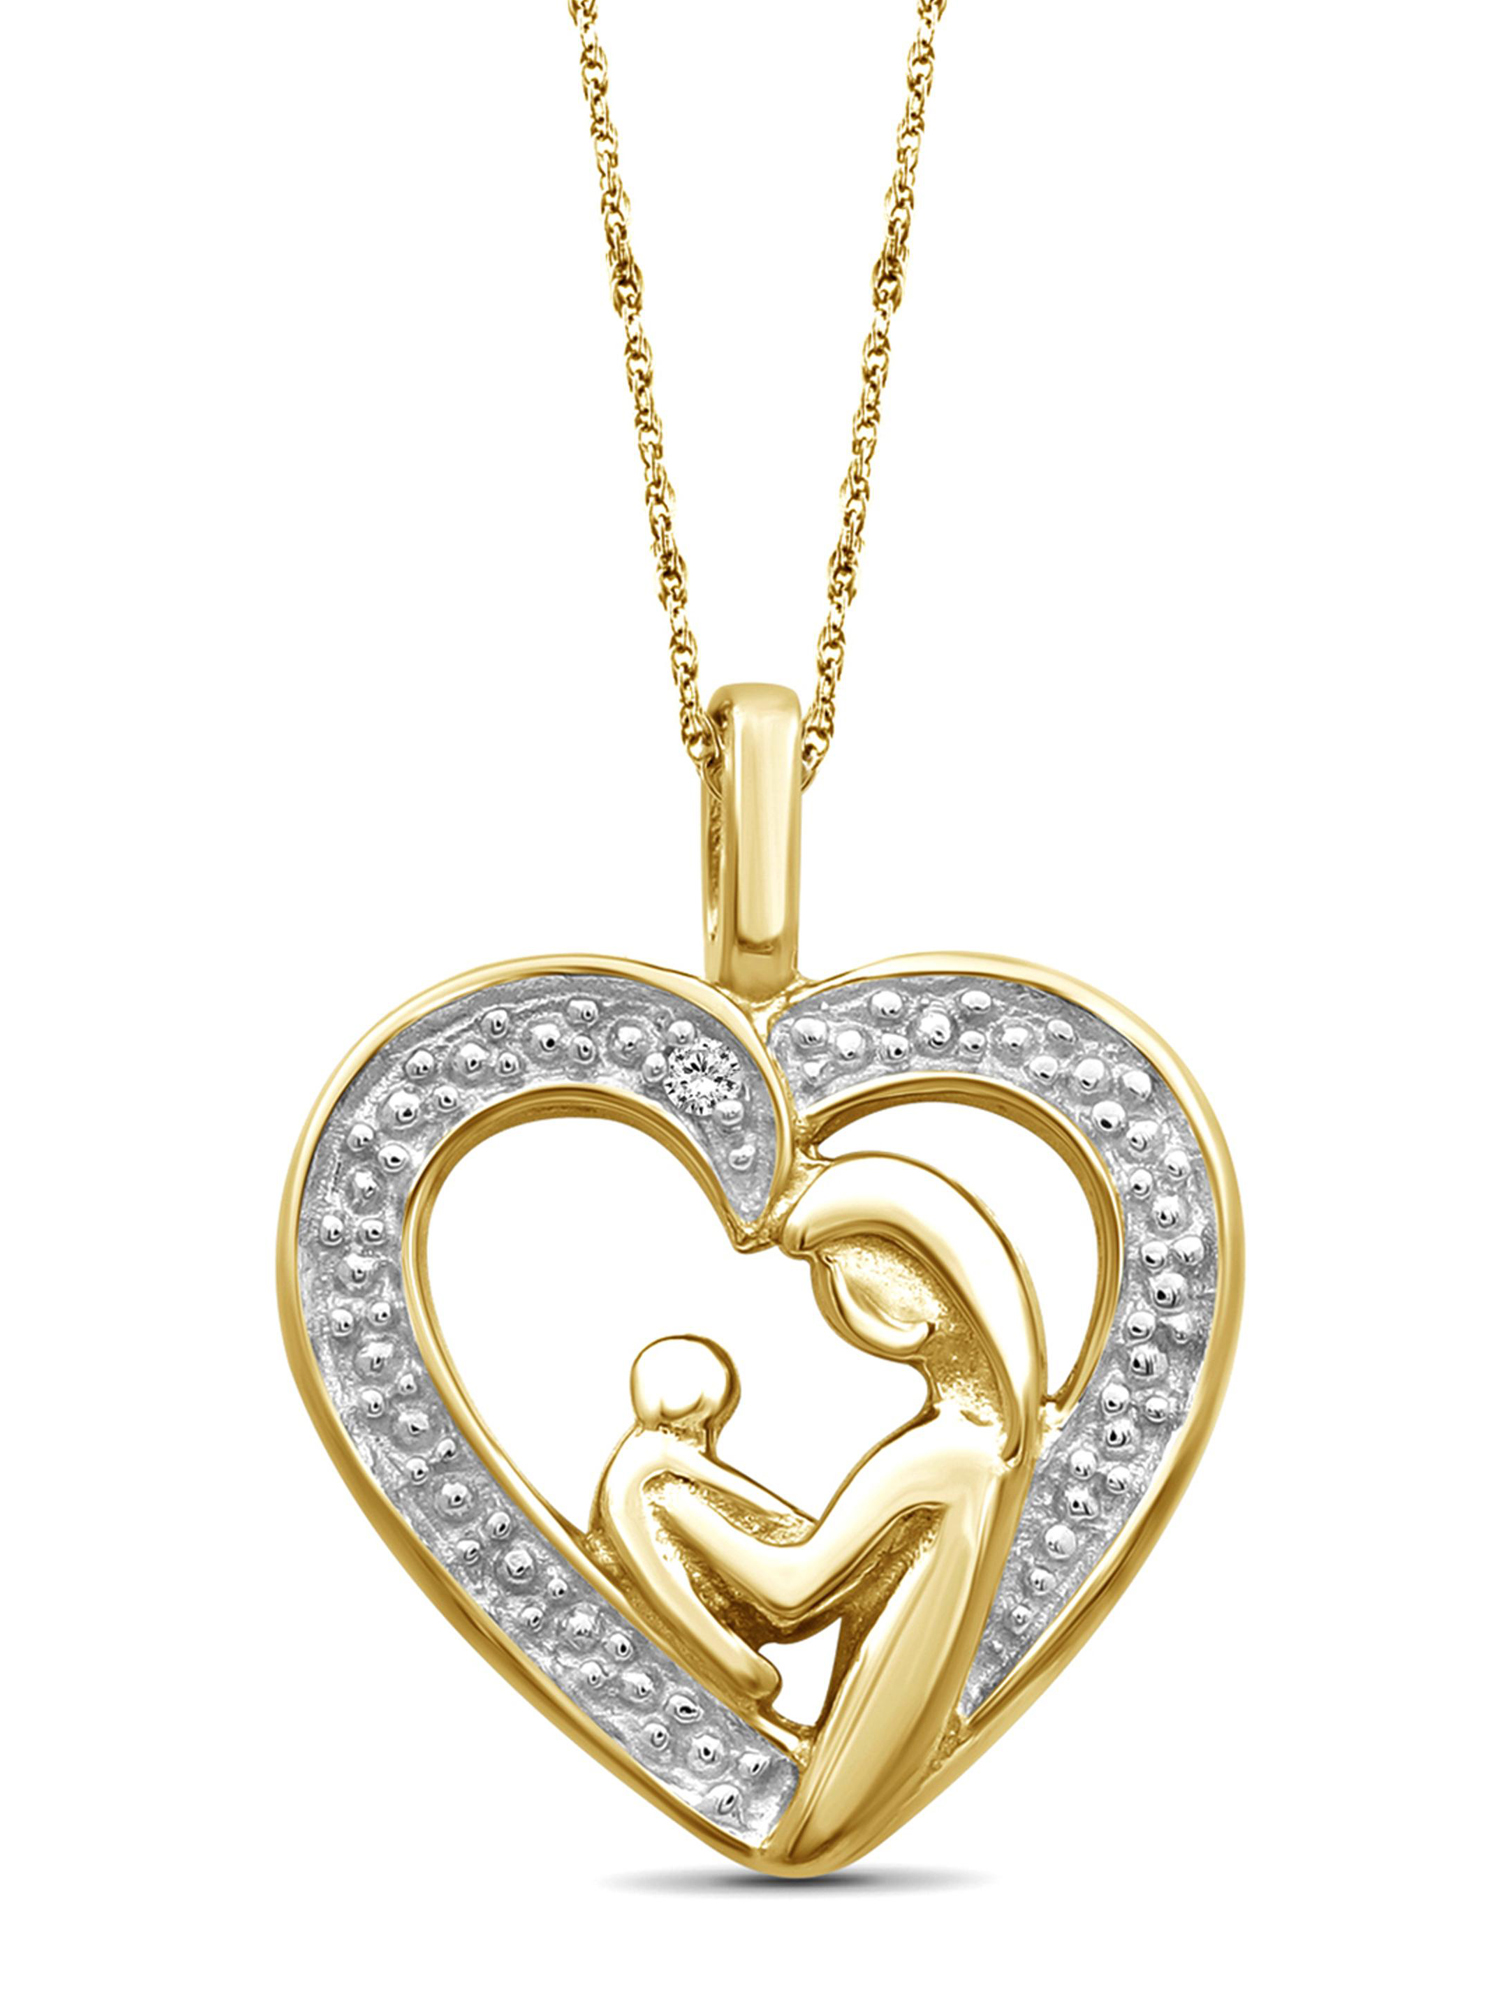 JewelersClub Heart Necklace with White Diamond Accent | 14K gold-plated Silver | Jewelry Pendant Necklaces for Women & 18 inch Rope Chain with Spring Clasp - image 1 of 5